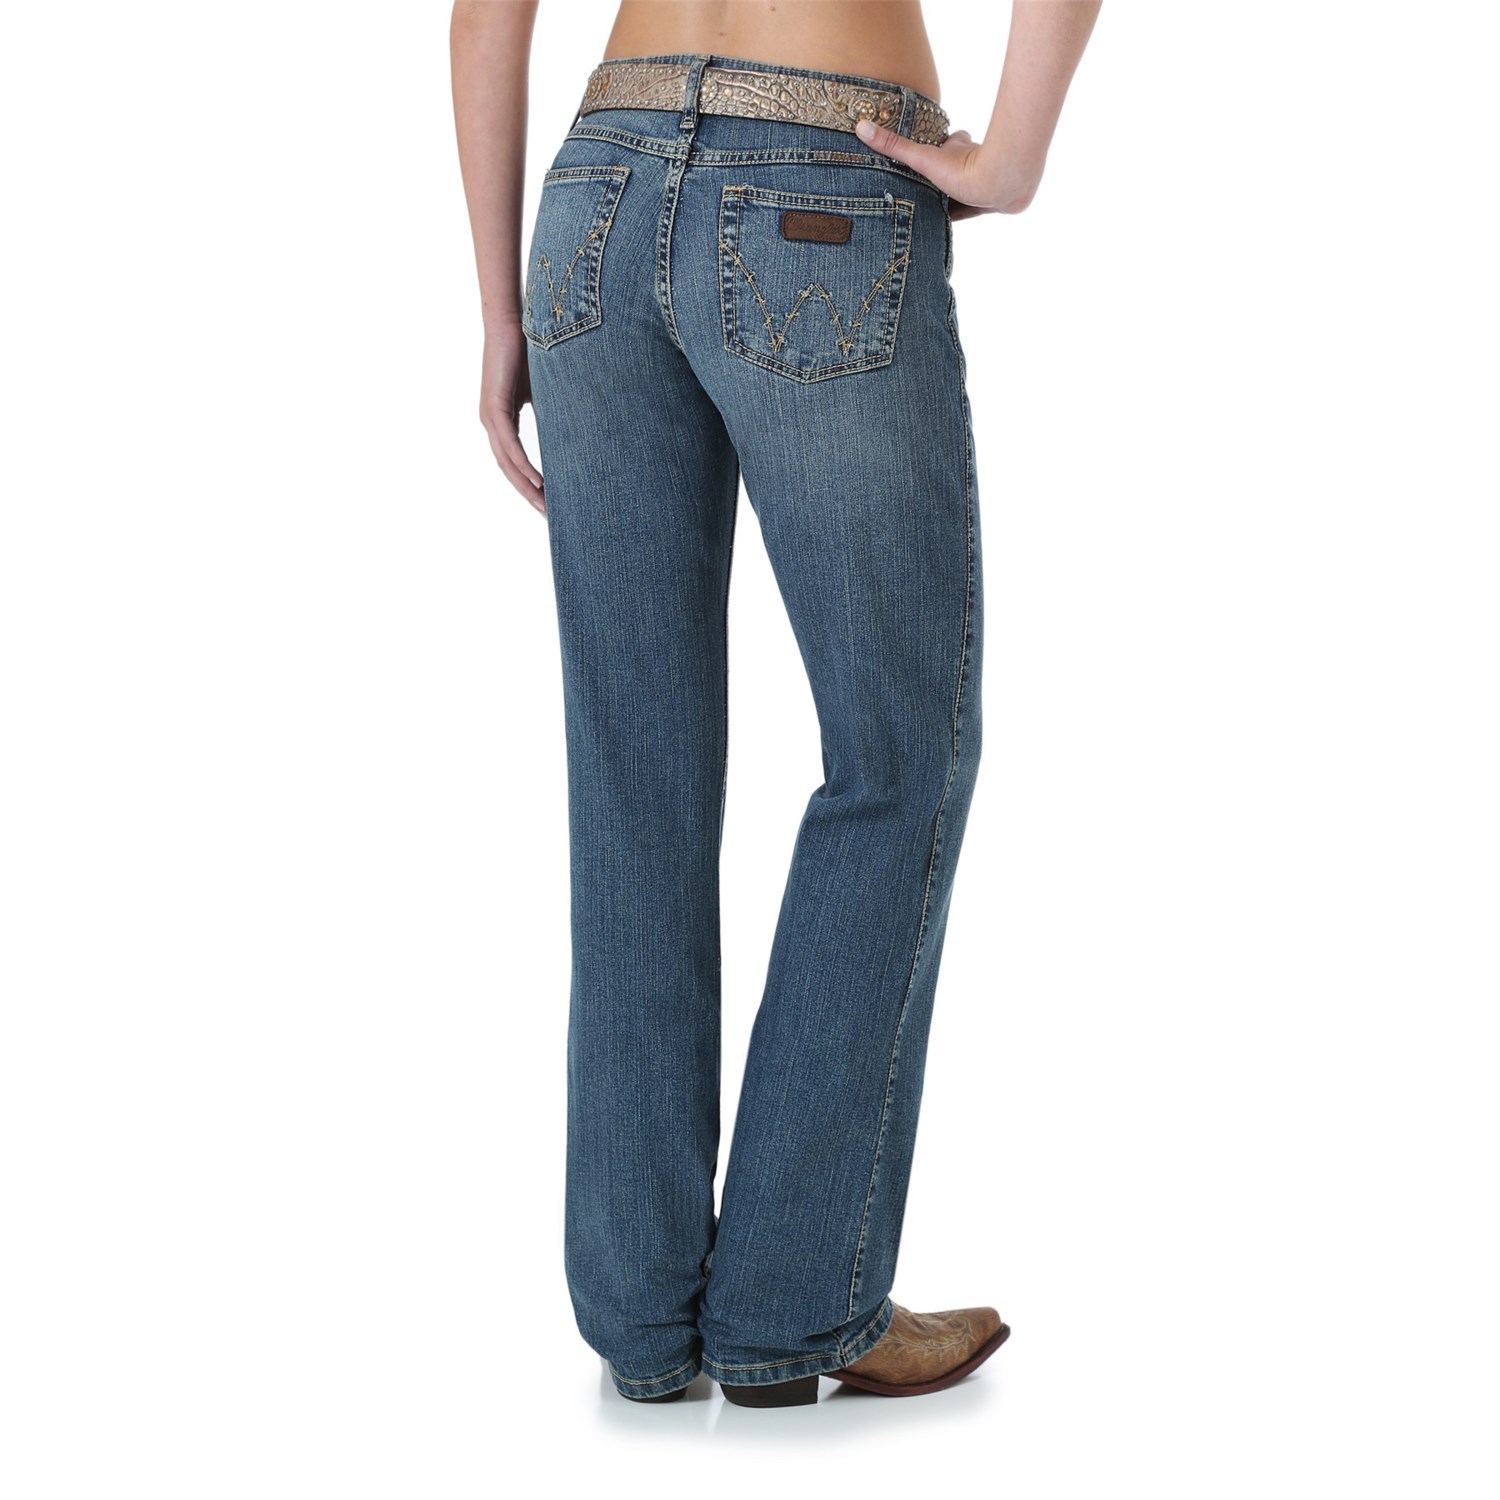 Wrangler Q-Baby Ultimate Riding Jeans (For Women) - Save 57%